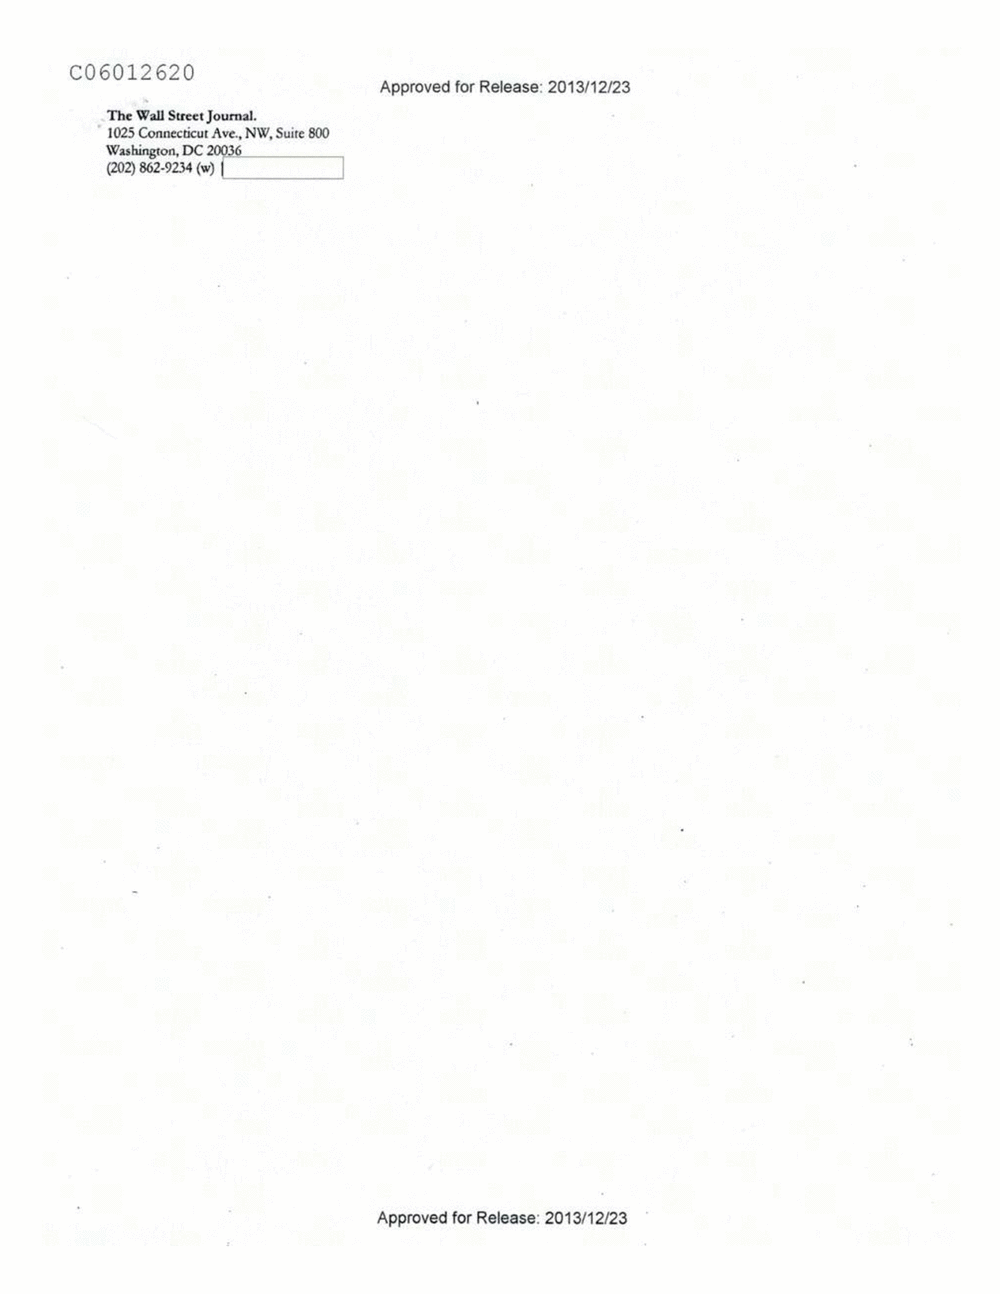 Page 170 from Email Correspondence Between Reporters and CIA Flacks